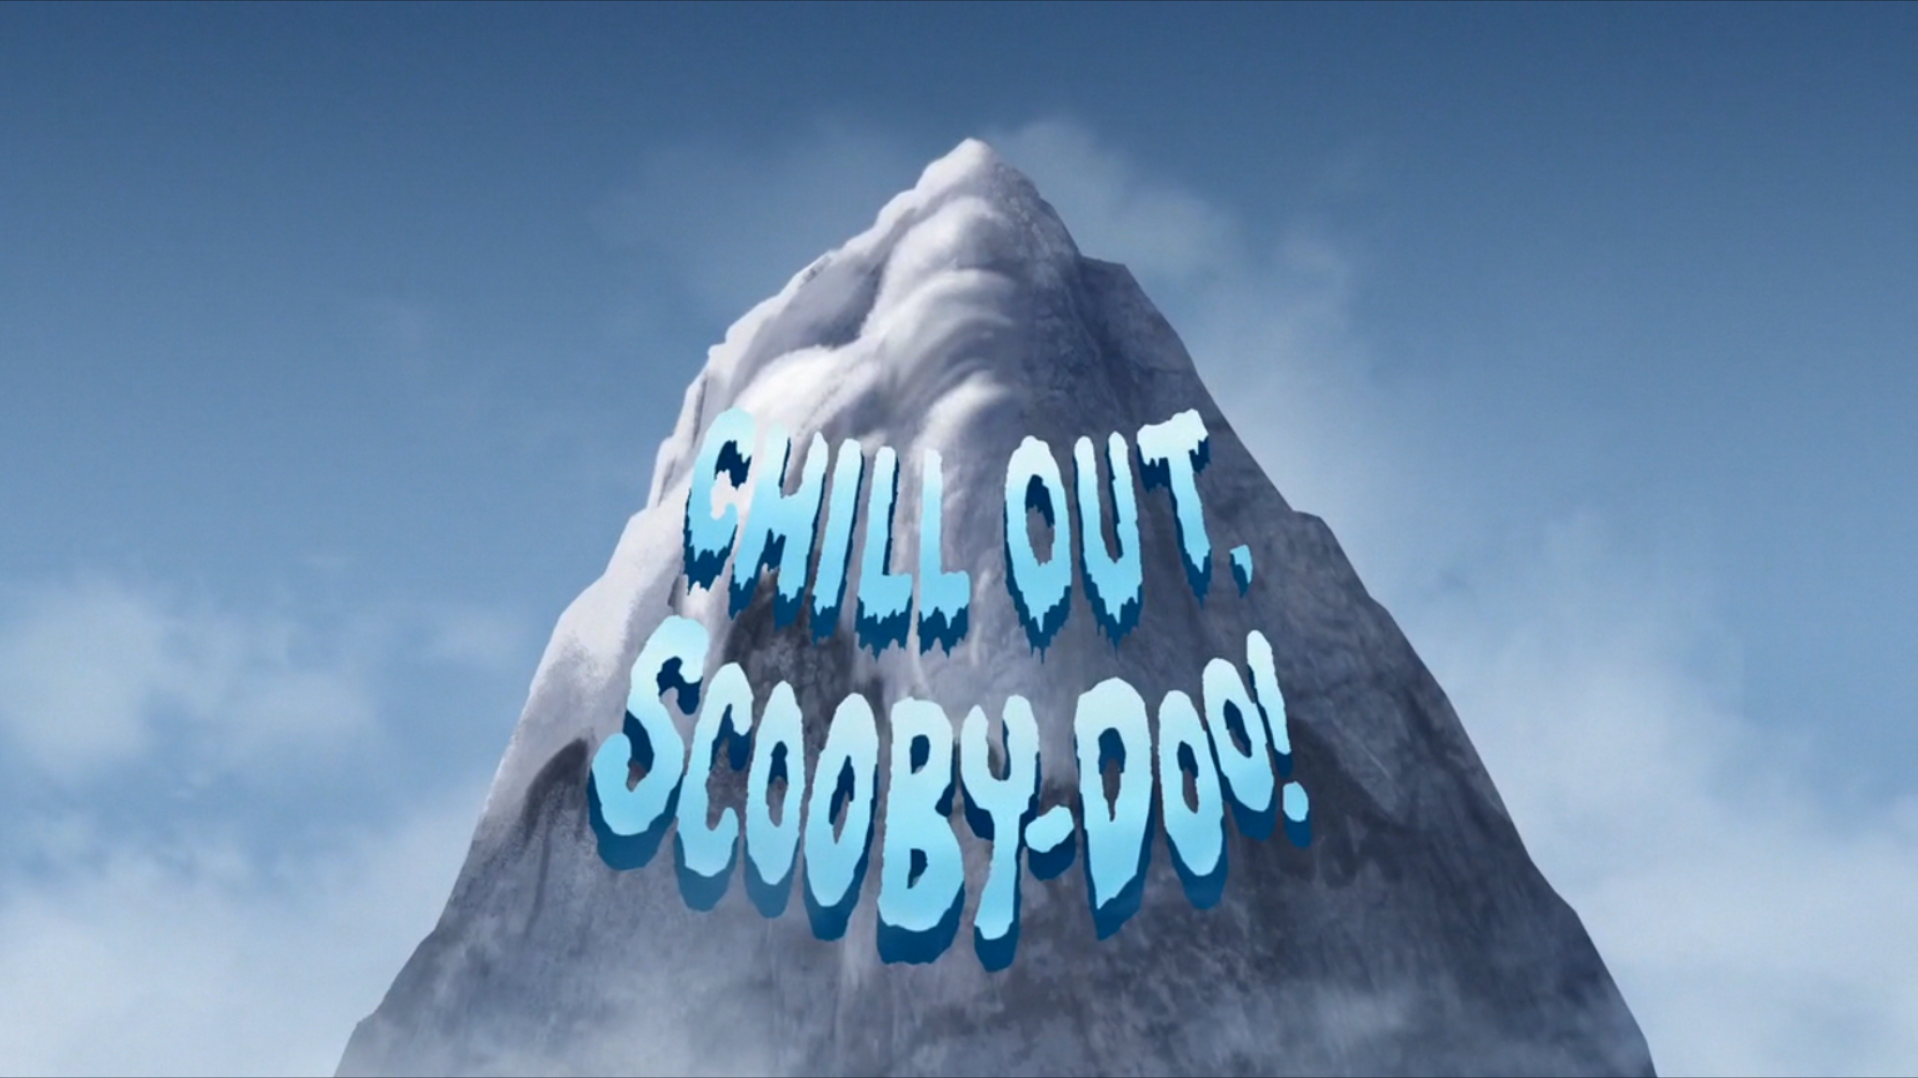 https://static.wikia.nocookie.net/scoobydoo/images/a/a9/Chill_Out_title_card.png/revision/latest?cb=20160209220226